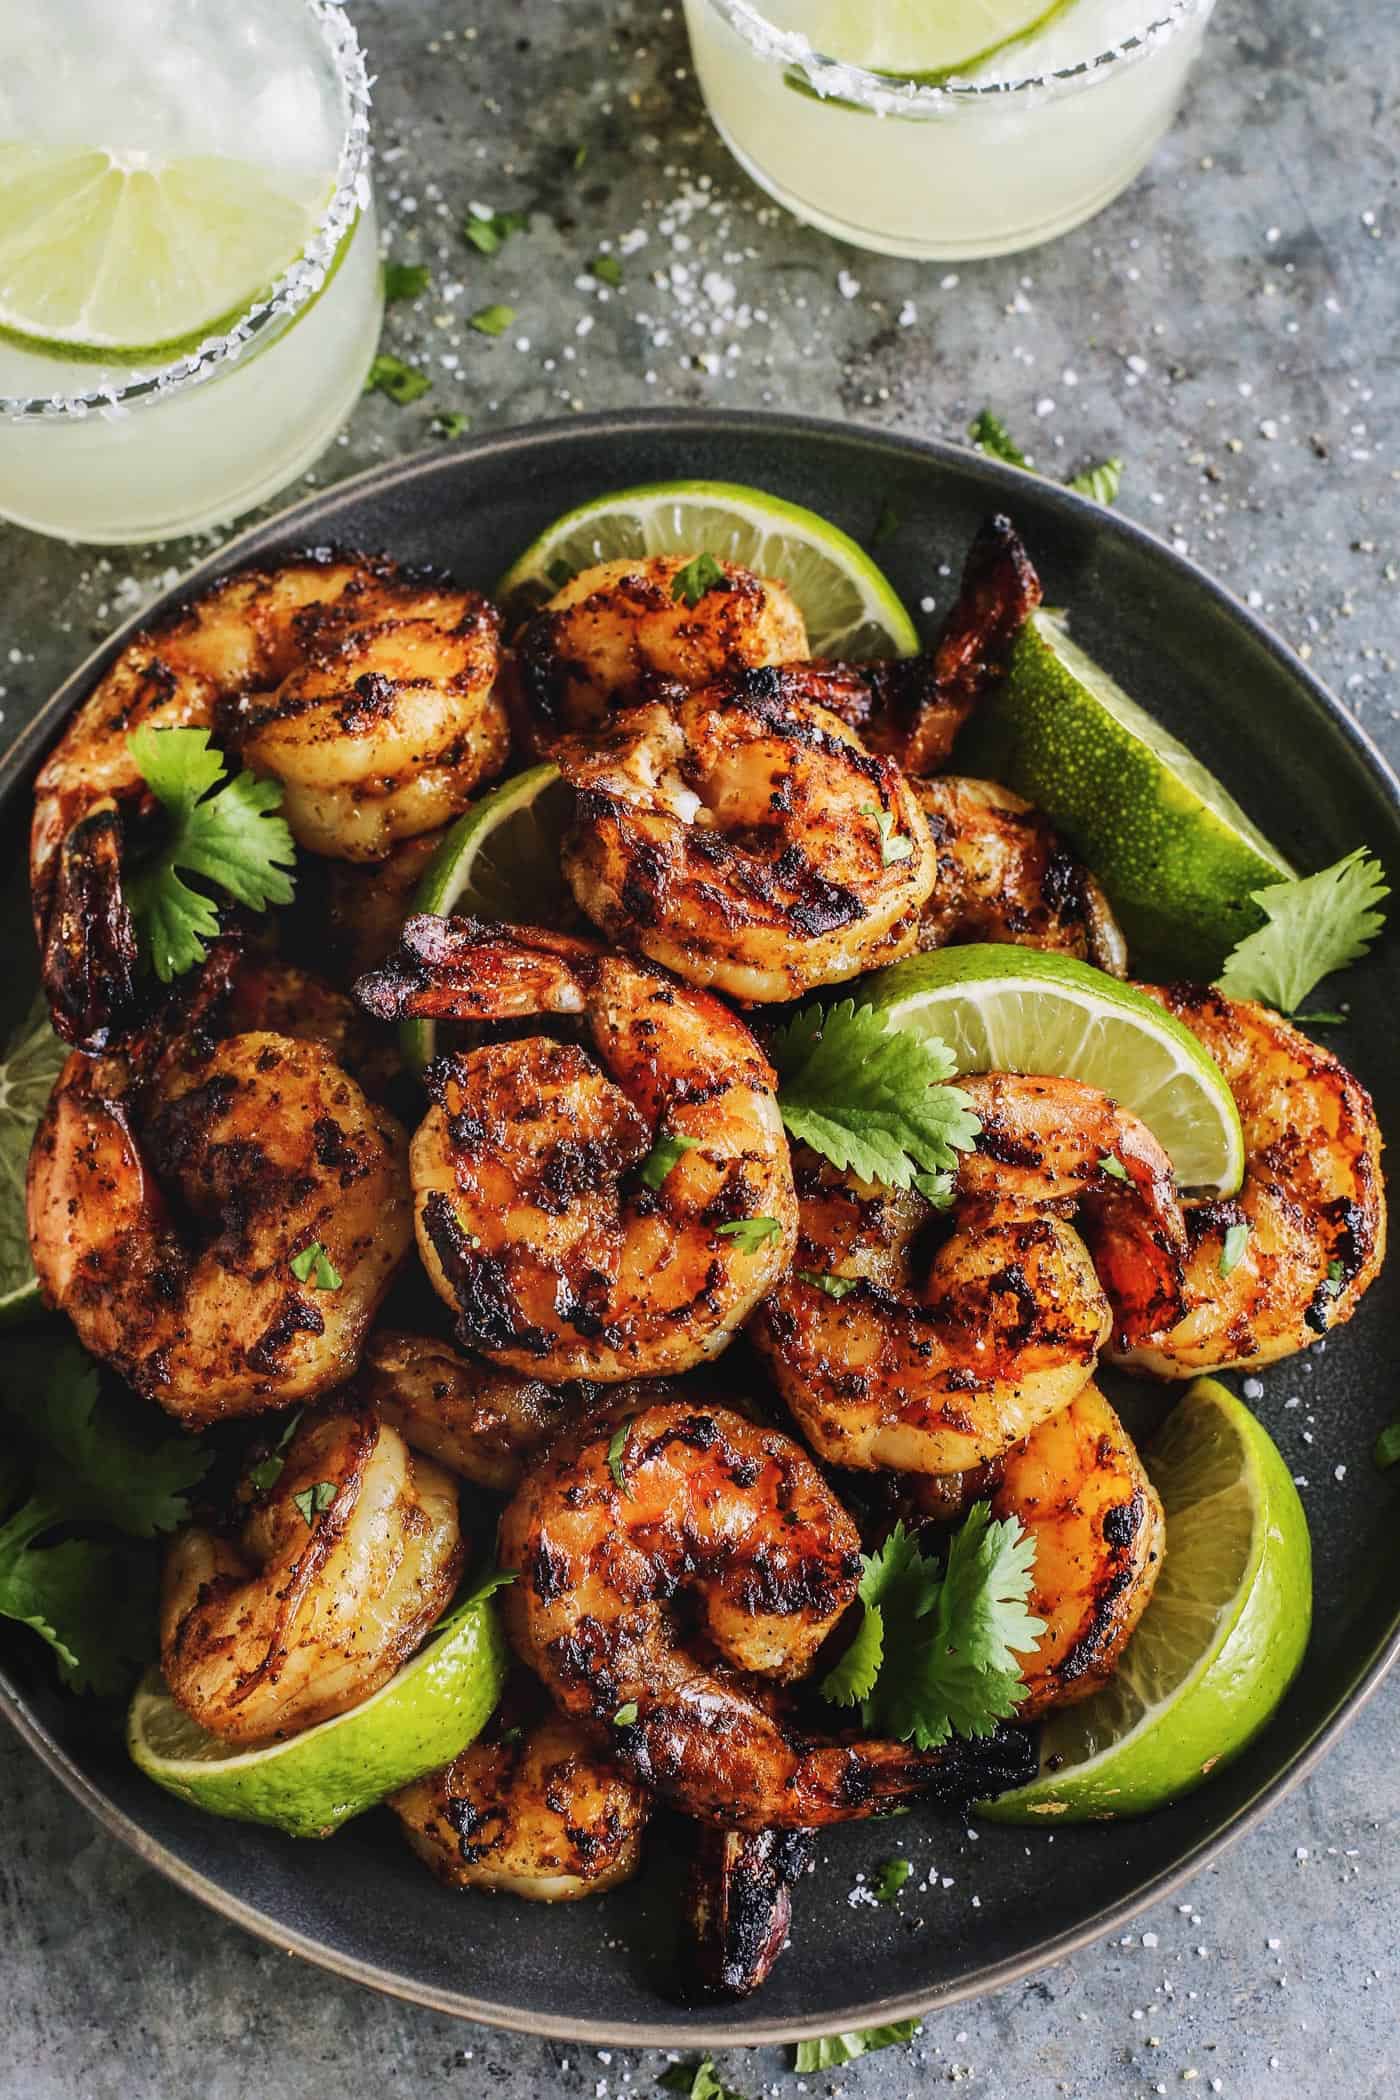 grilled shrimp and lime wedges on black plate, plus two margaritas